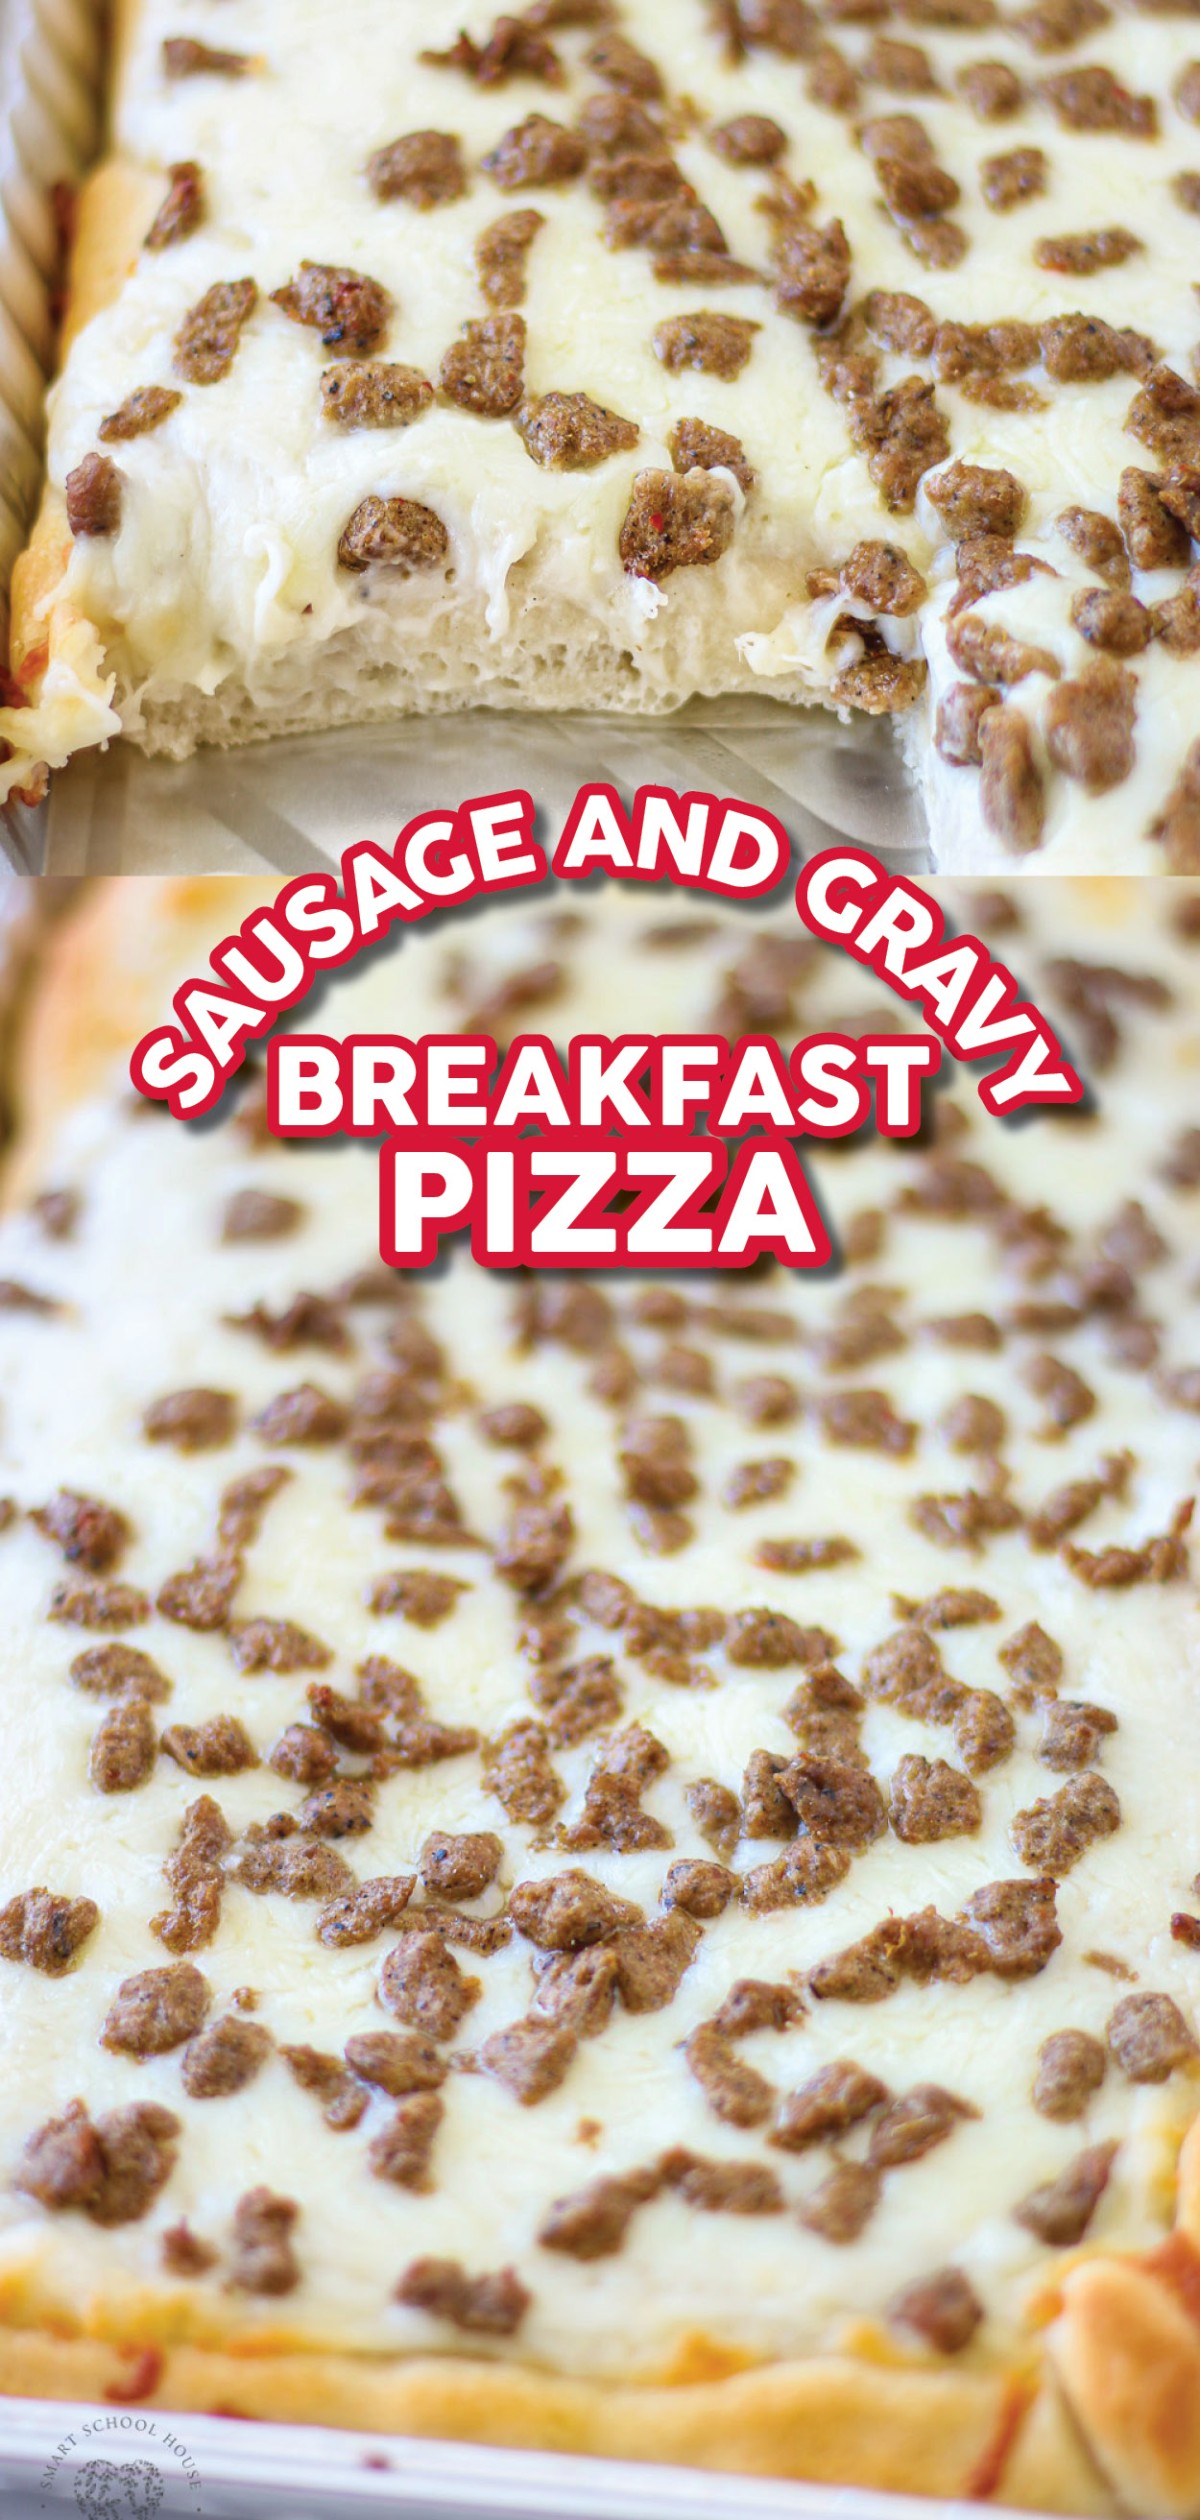 Easy Breakfast Pizza is a great on-the-go breakfast idea that is fun to eat. Delicious breakfast sausage crumbles on top of country gravy, then covered in ooey-gooey cheese.